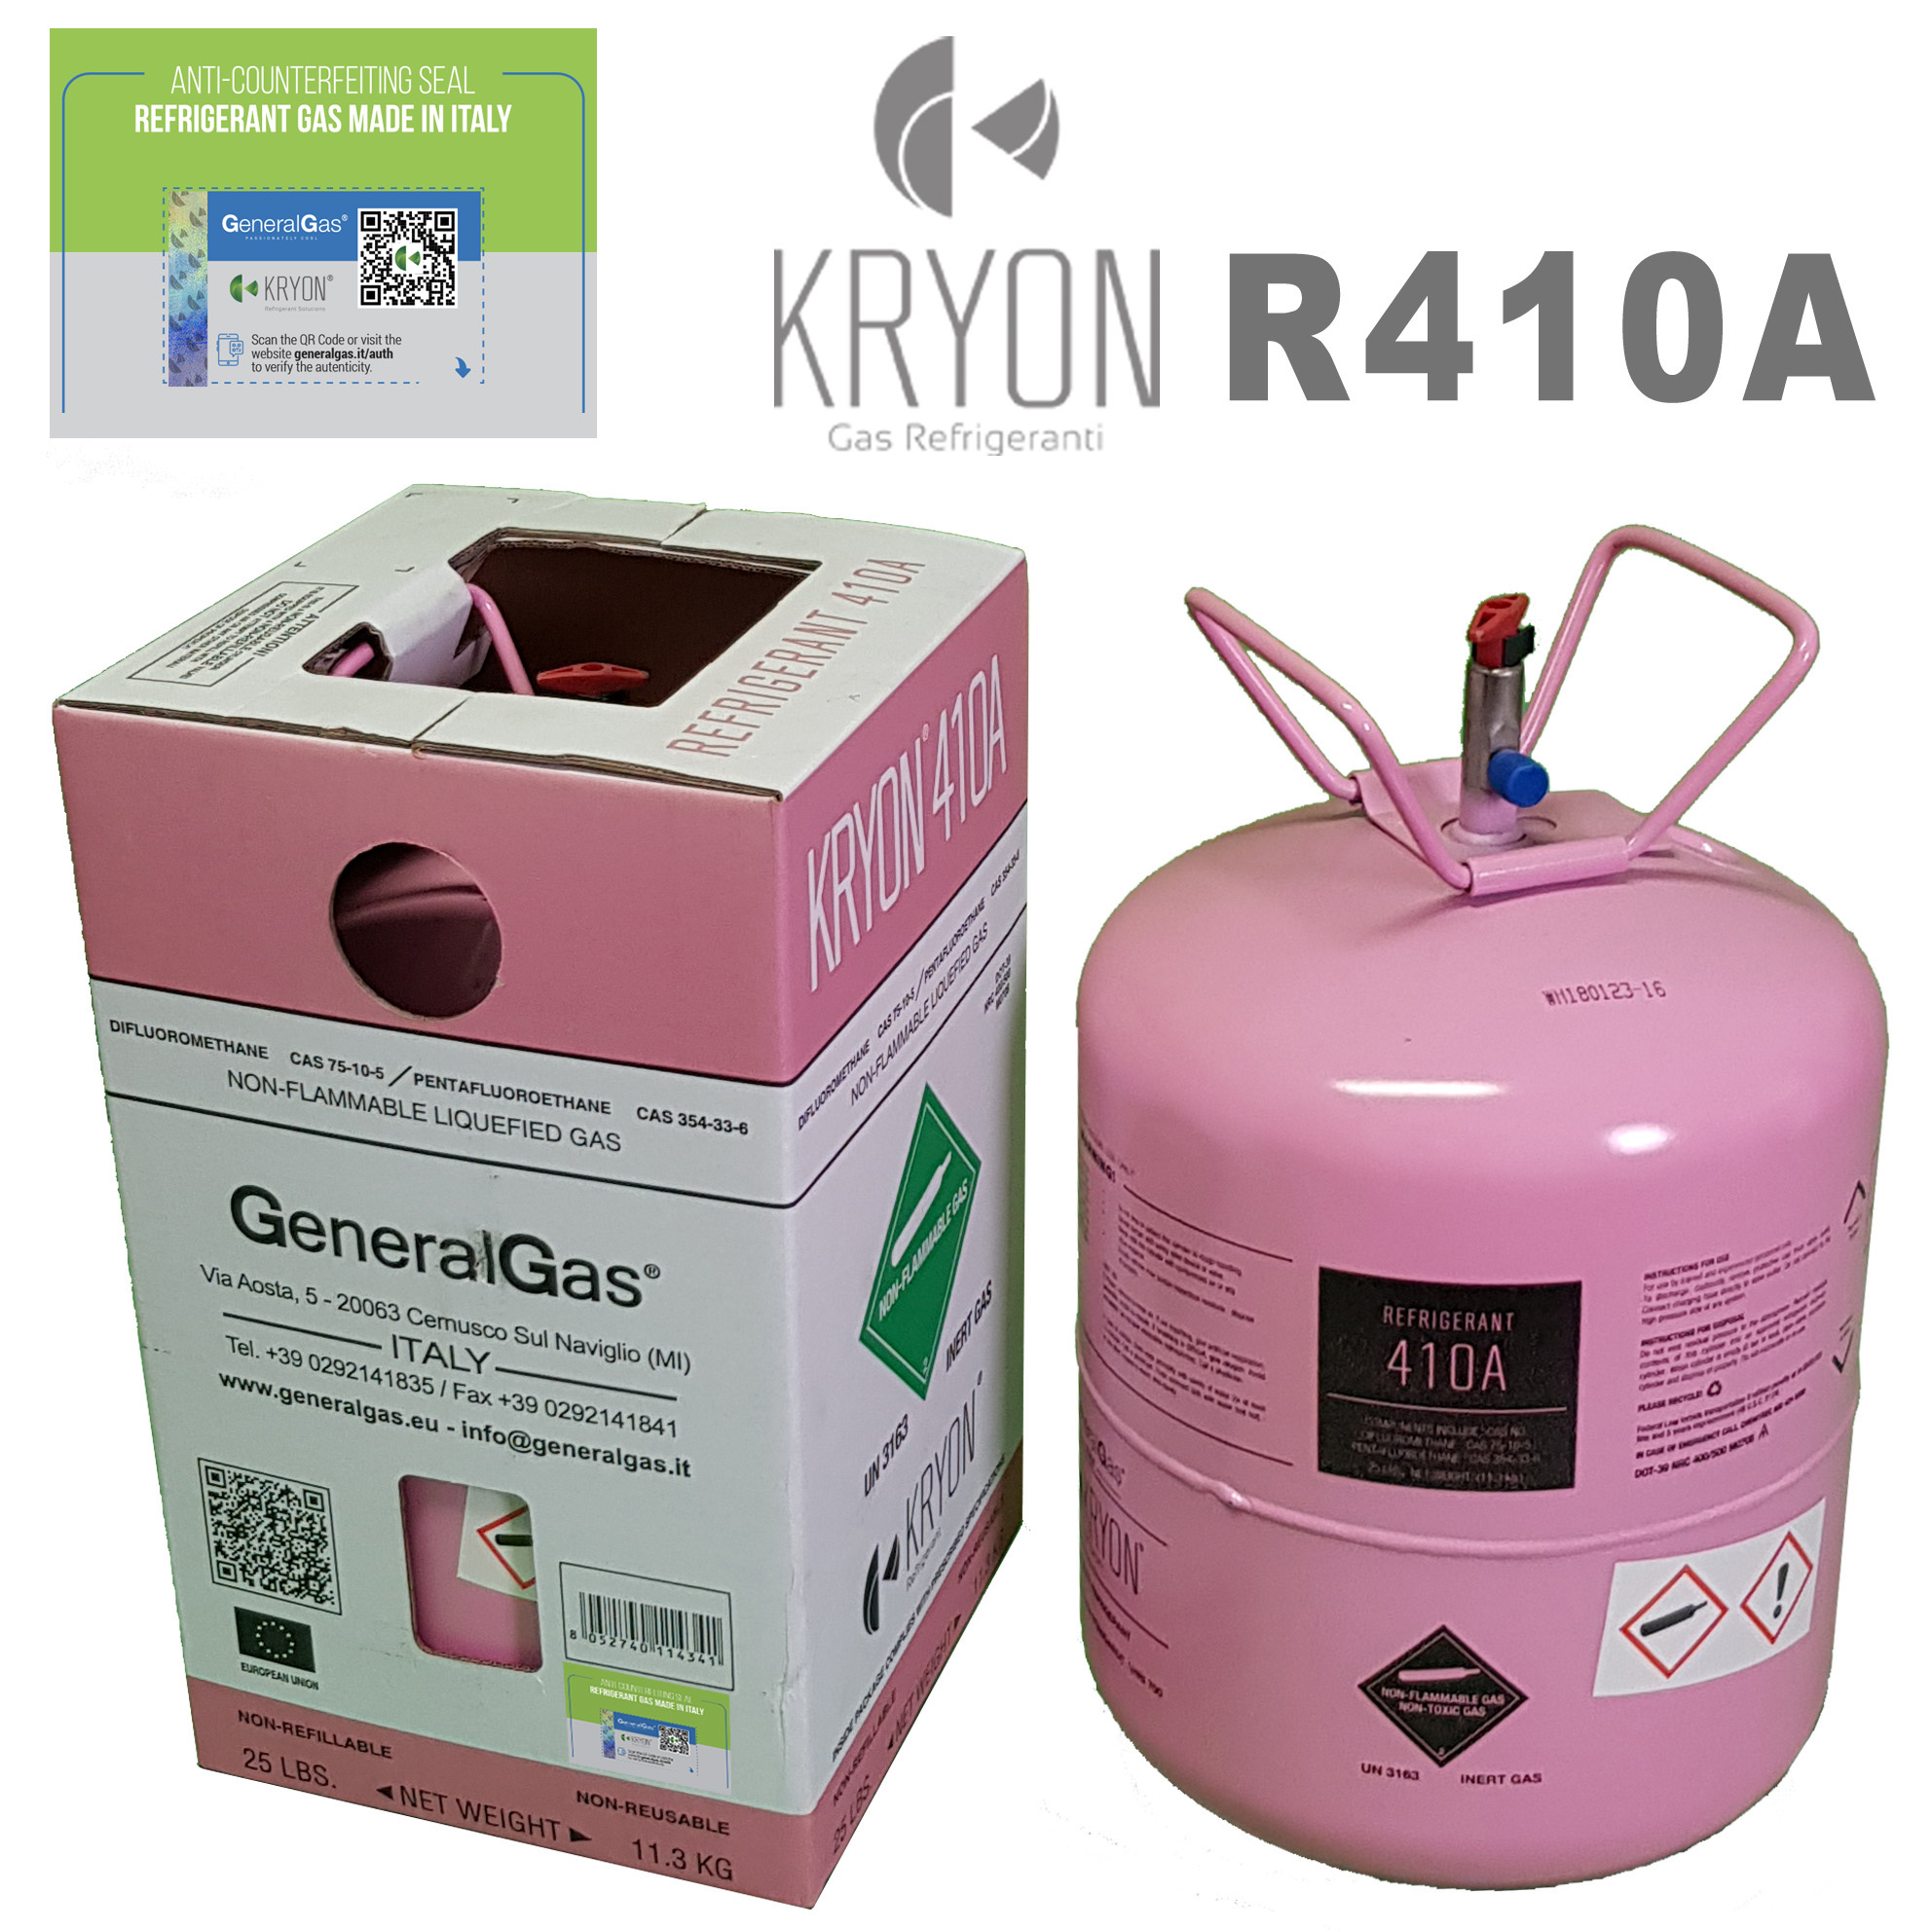 R410A Kryon® 410A - in DOT39 (USA standard) non-refillable cylinder 13,77 Lt / 35 Bar - valve ¼ SAE RH - net 11,3 Kg - 25 lbs - MADE IN ITALY European Union (gas quality meets AHRI700-2019 std.)